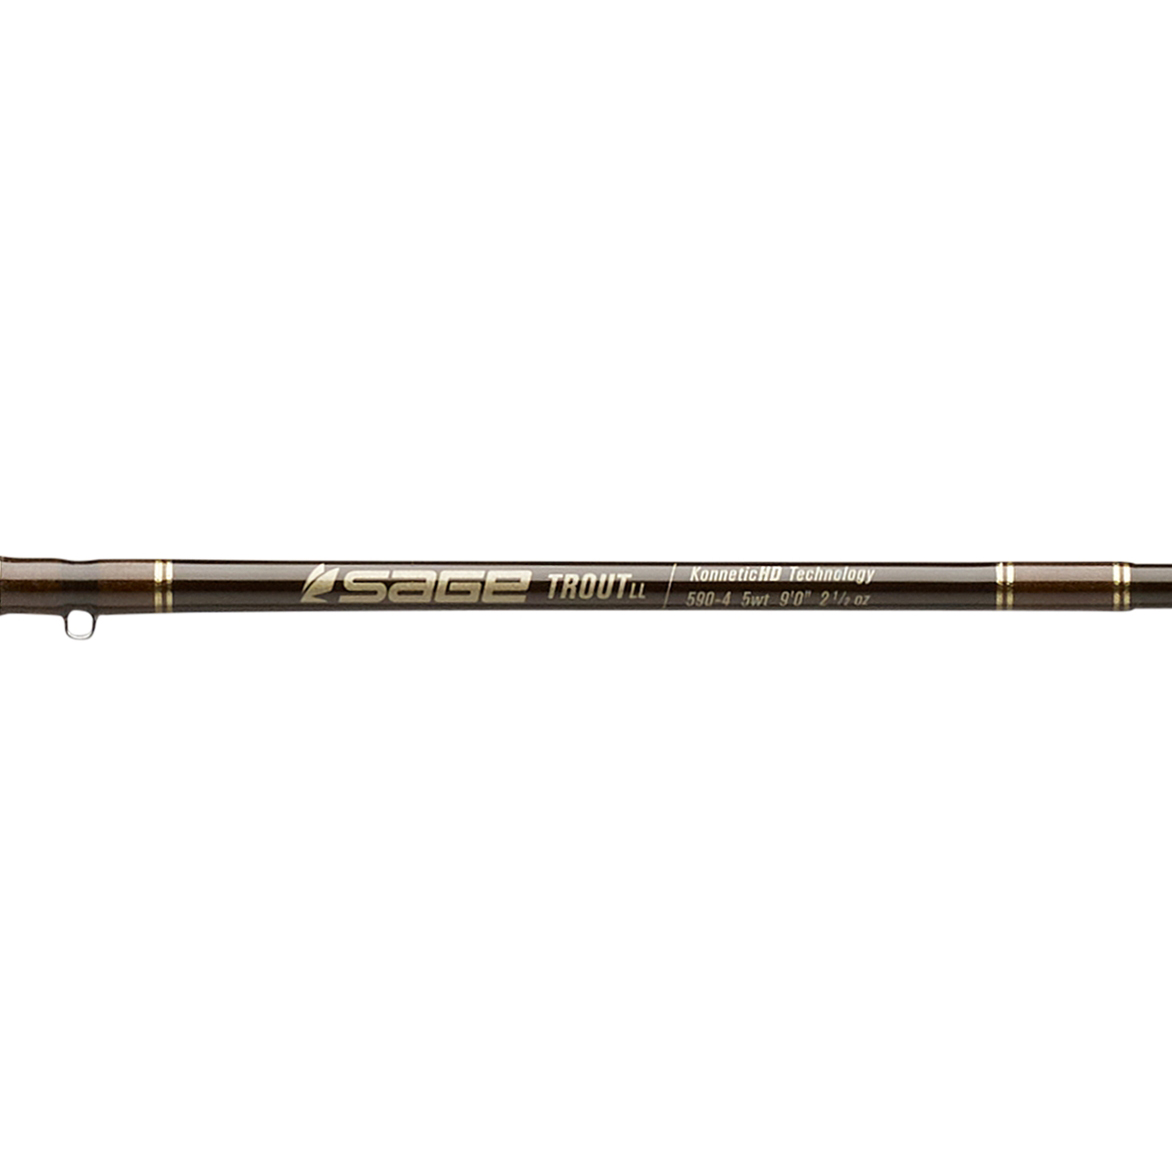 Sage Trout LL Blank – Guide Flyfishing, Fly Fishing Rods, Reels, Sage, Redington, RIO